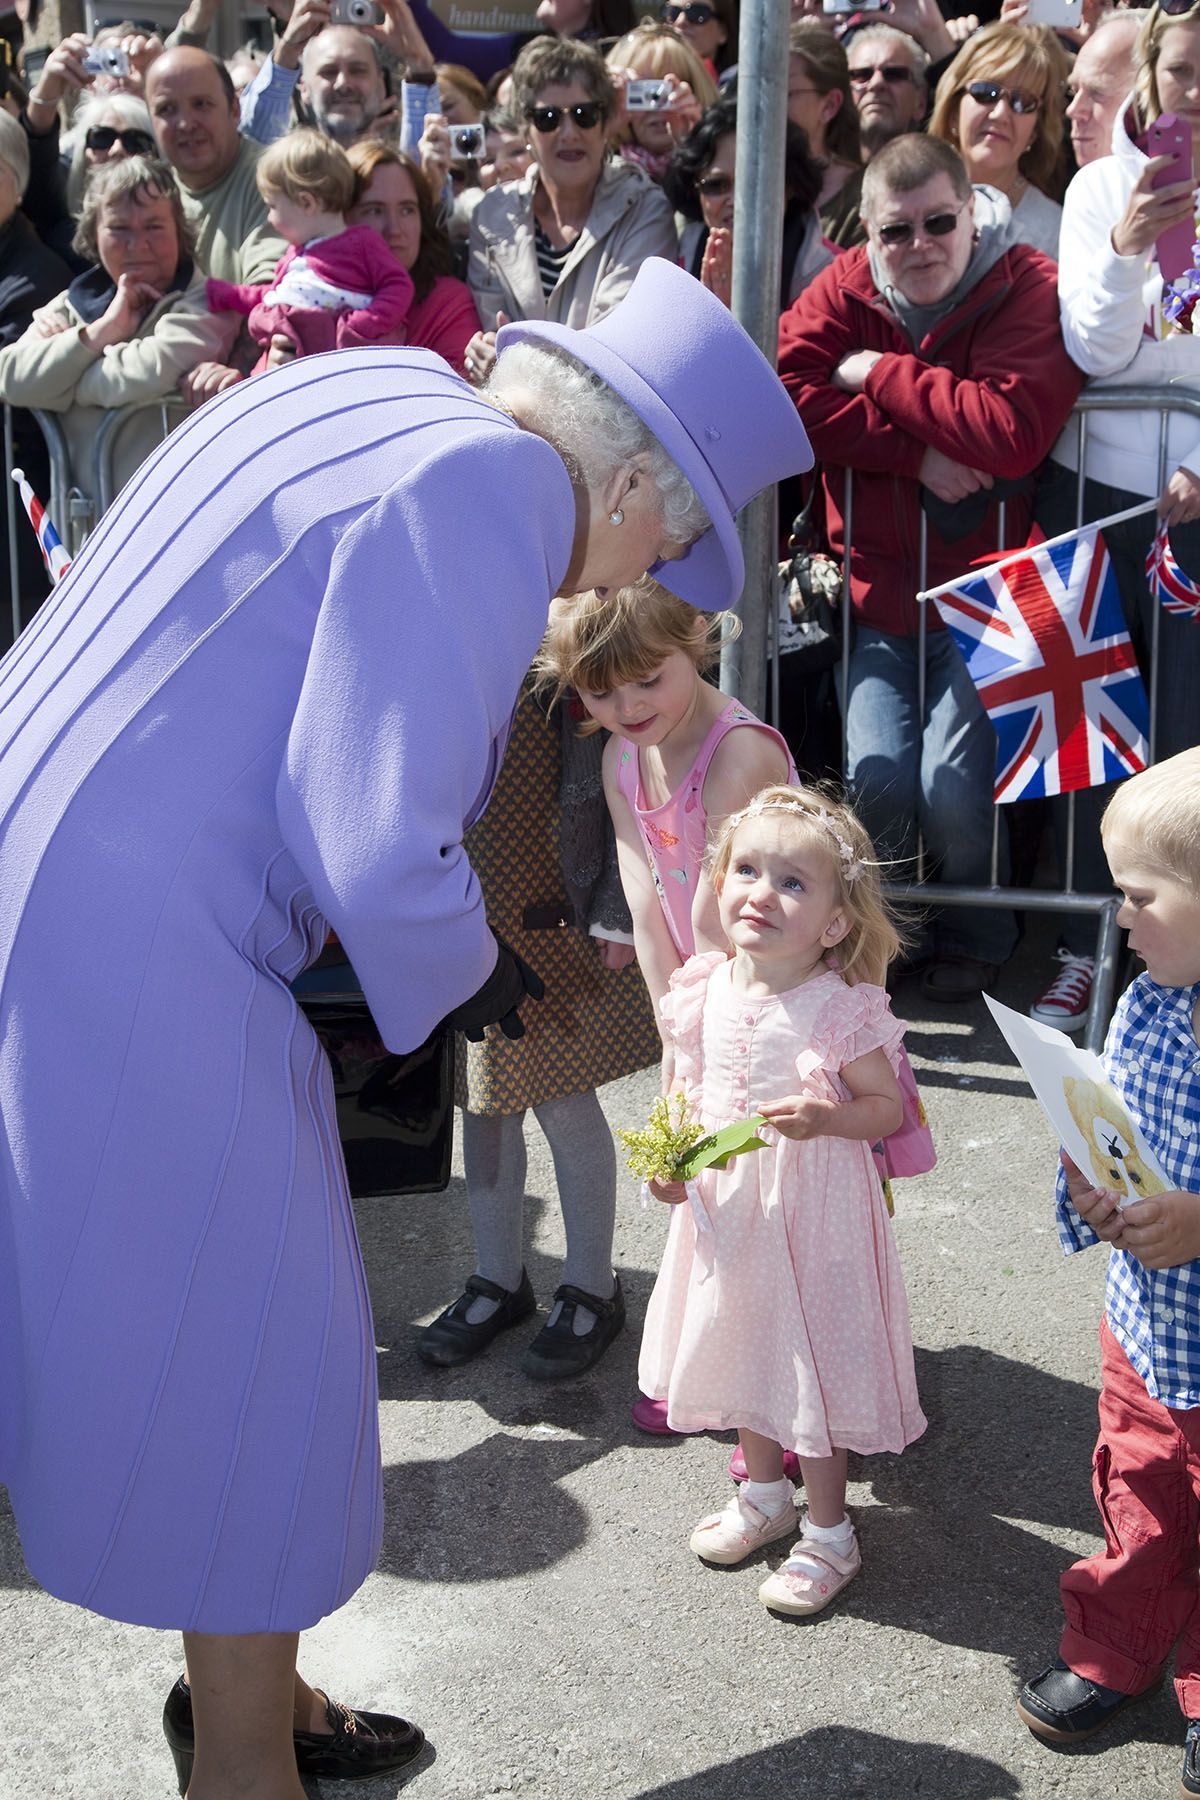 Reluctant to hand over her flowers - a little girl at St Ives presented to the Queen in 2013 Picture: Phil Monckton